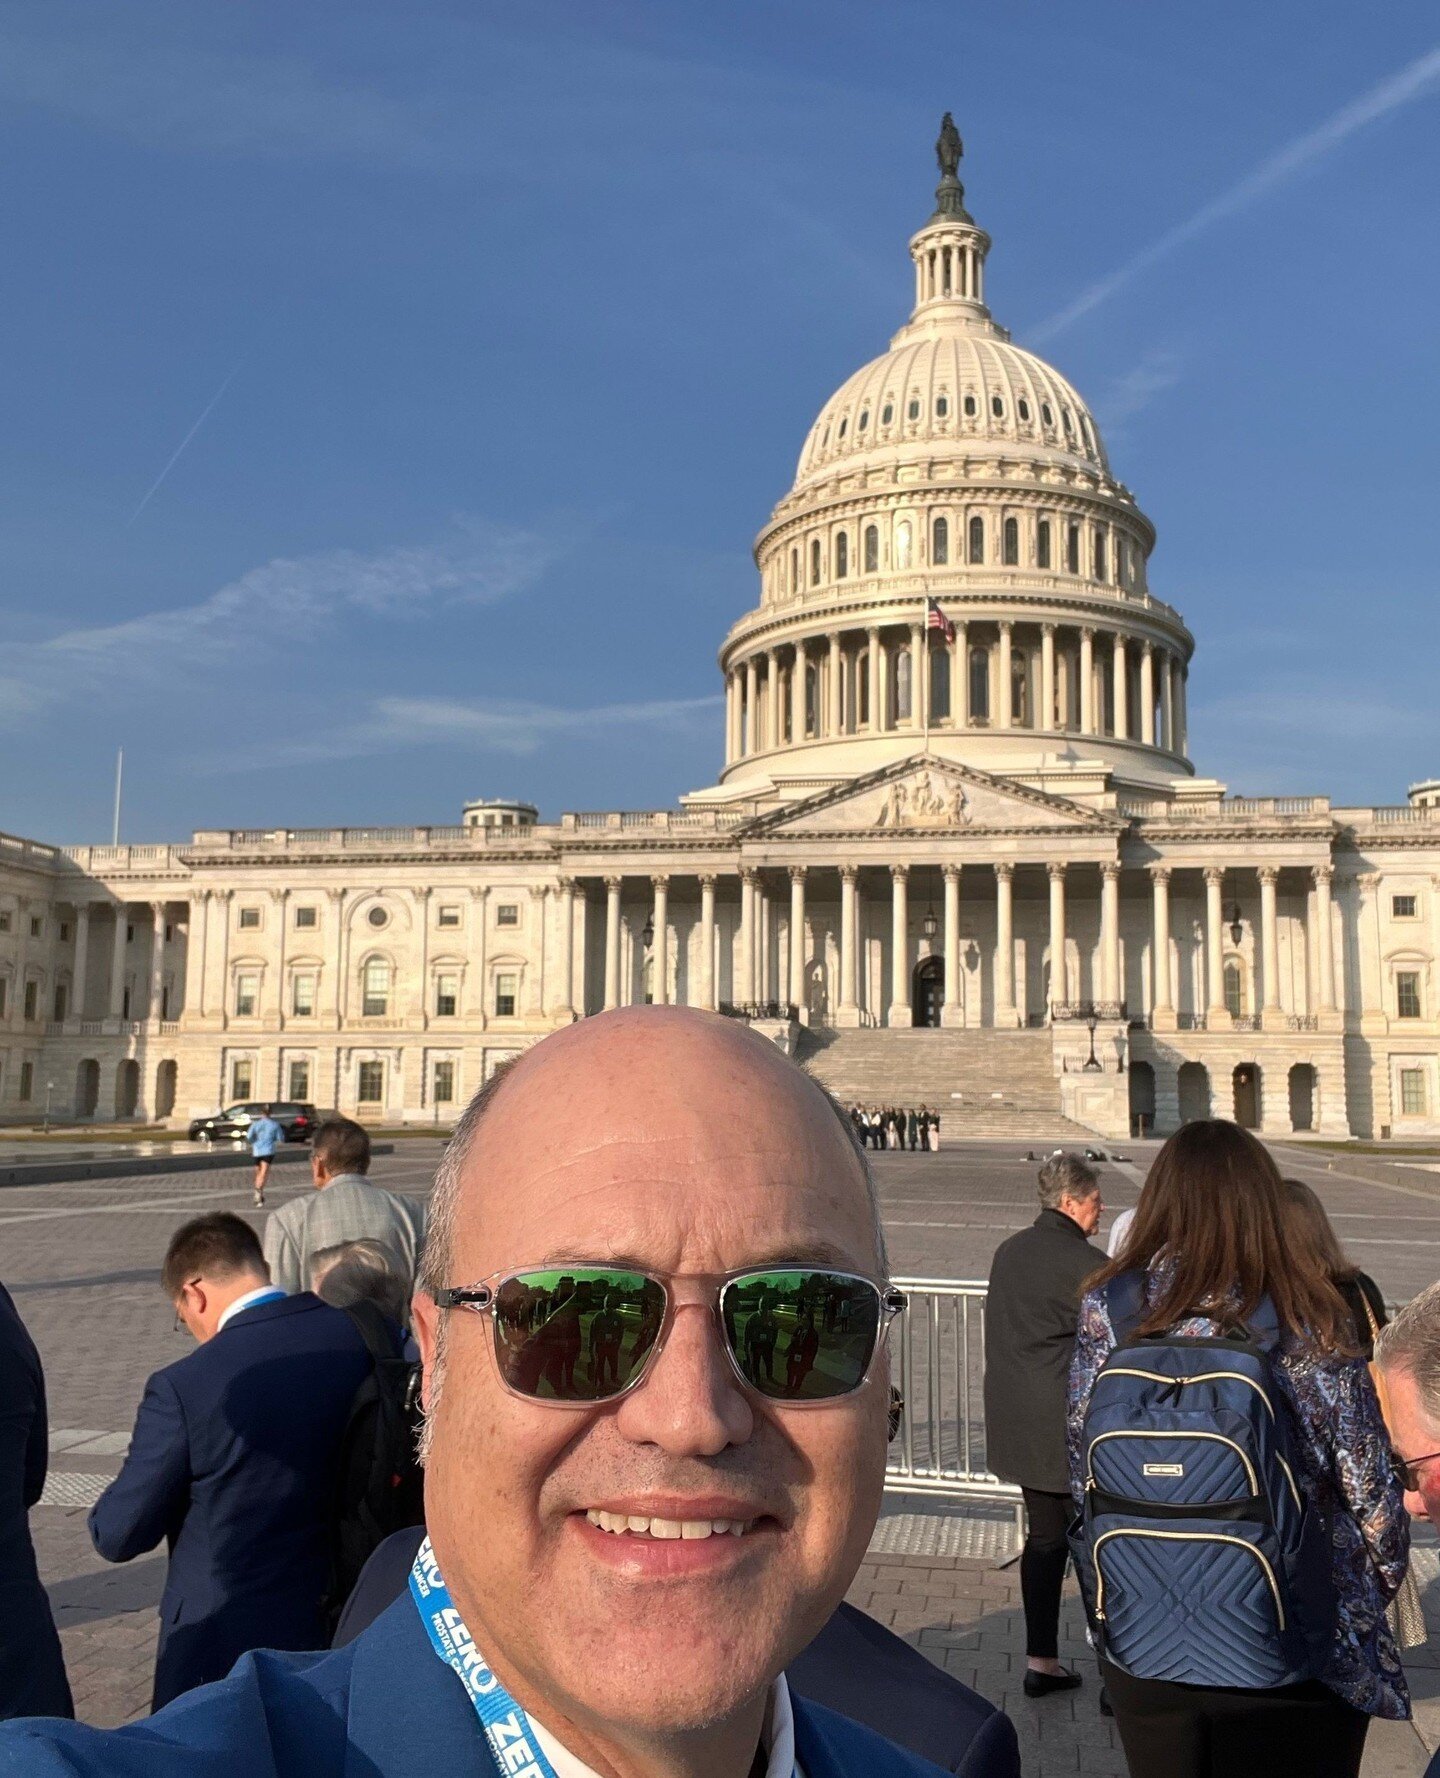 🏛️Paul is on Capitol Hill advocating for prostate cancer care and research, raising awareness about the importance of support. Let's stand with Paul and spread the word for a cause that matters!🎗️⁠
⁠
⁠
#Zerocancer #ProstateCancerAdvocacy #CureCance